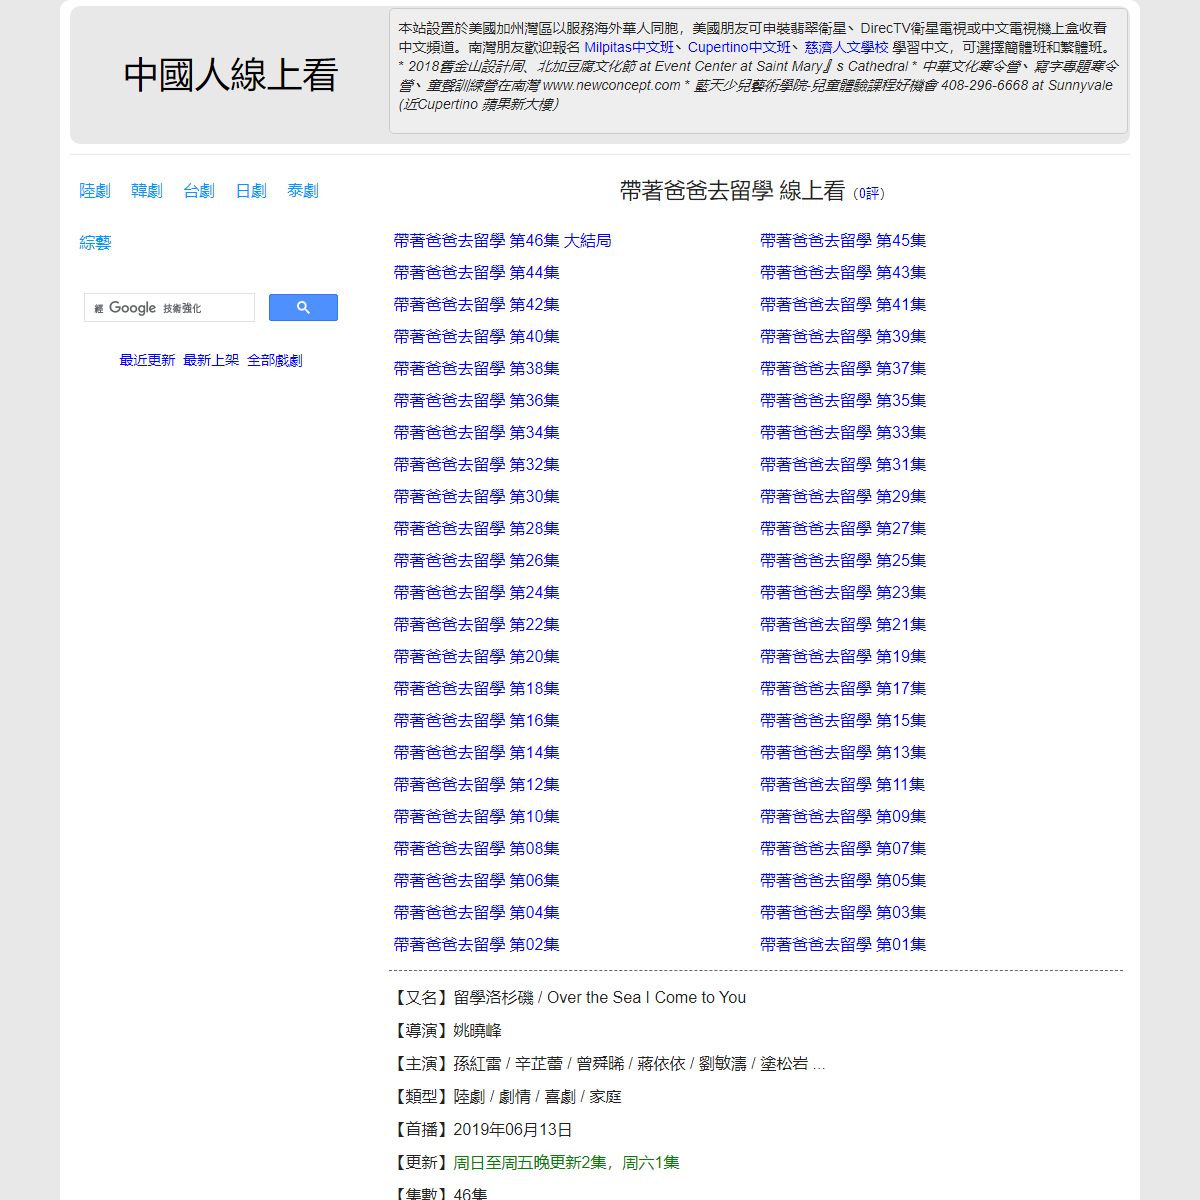 A complete backup of https://chinaq.tv/cn190613/